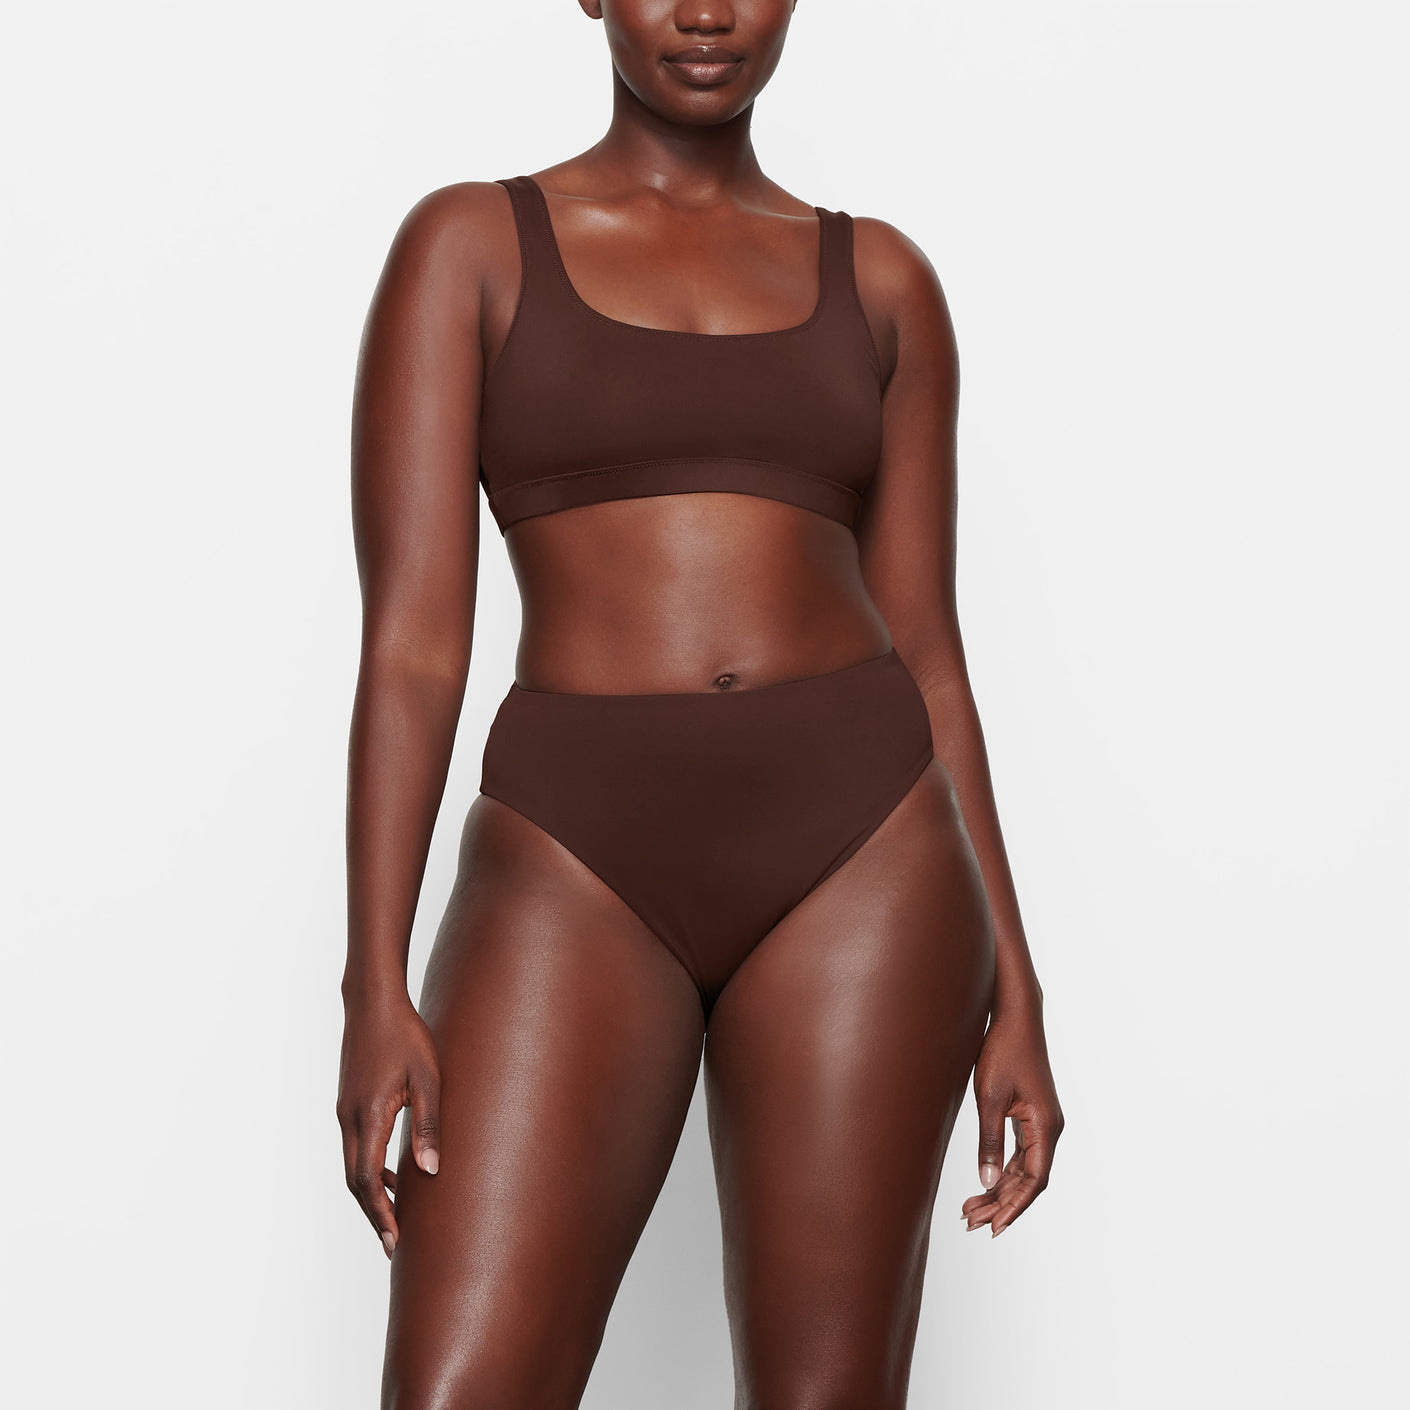 A MODEL STANDS FACING FORWARD WEARING THE SKIMS SWIM MID WAIST BOTTOM IN COCOA | SEE: M, L, XL